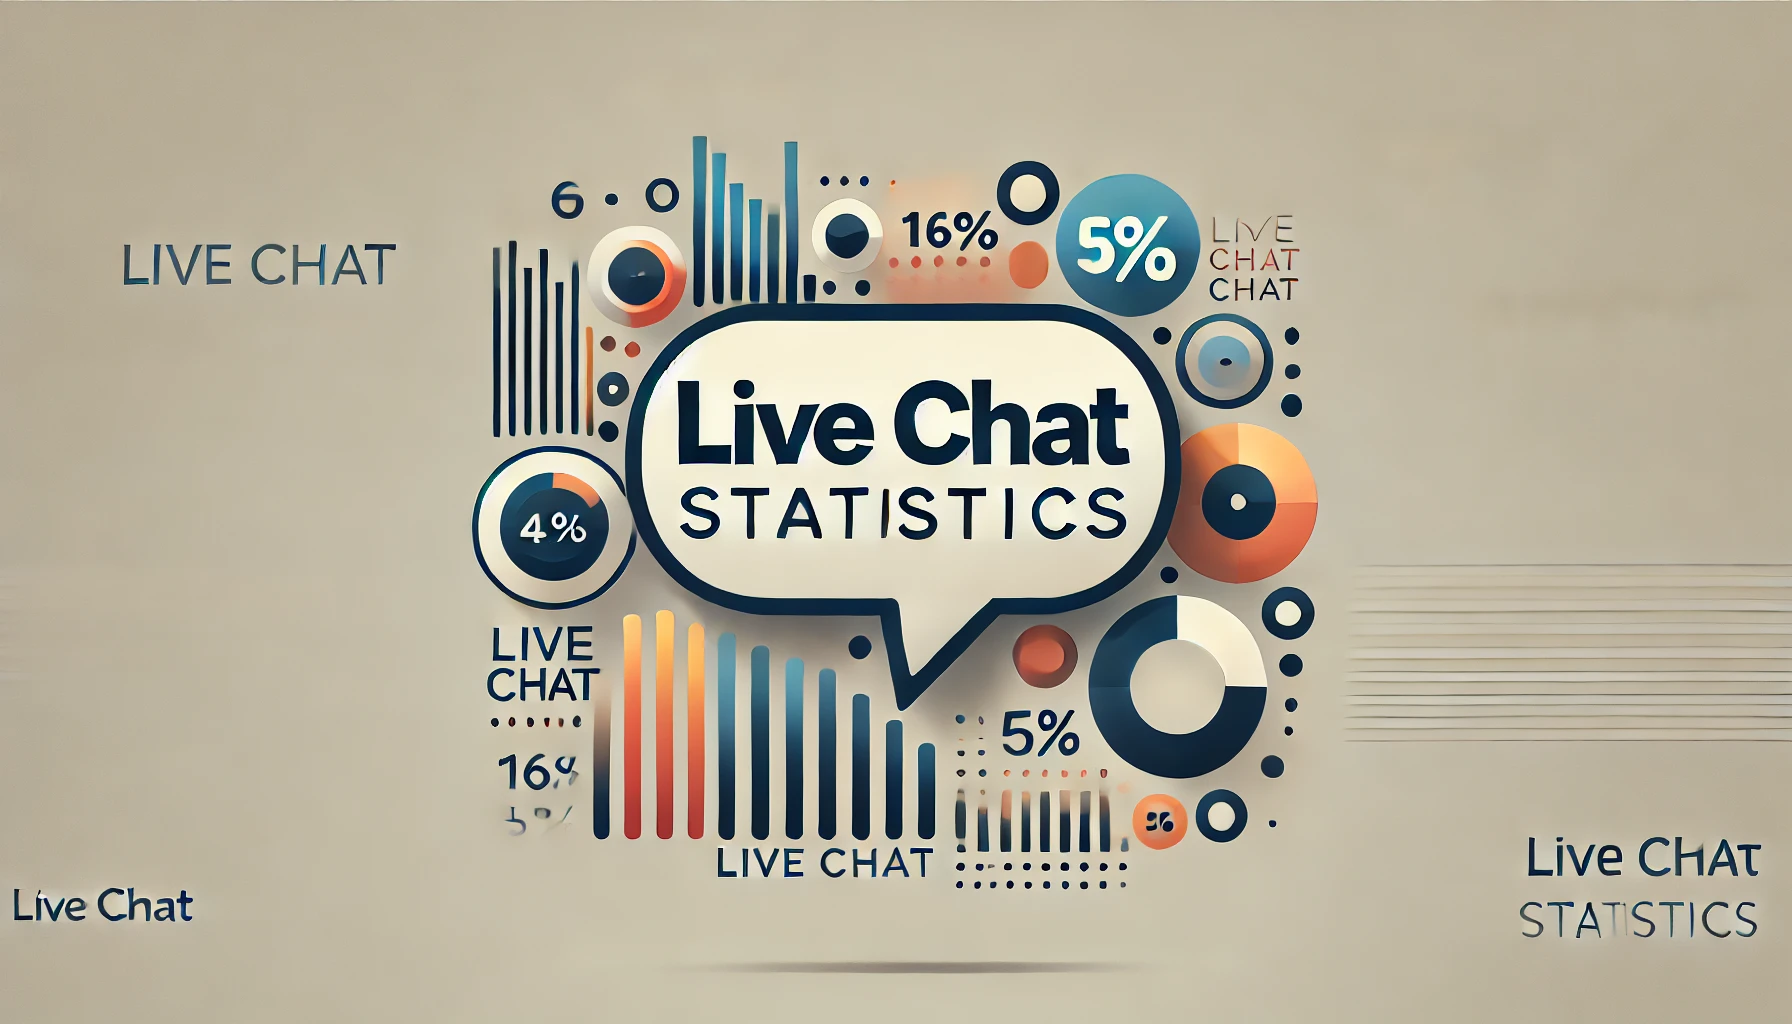 Live Chat Statistics By Consumer Behavior, Satisfaction Rate And Communication Channel